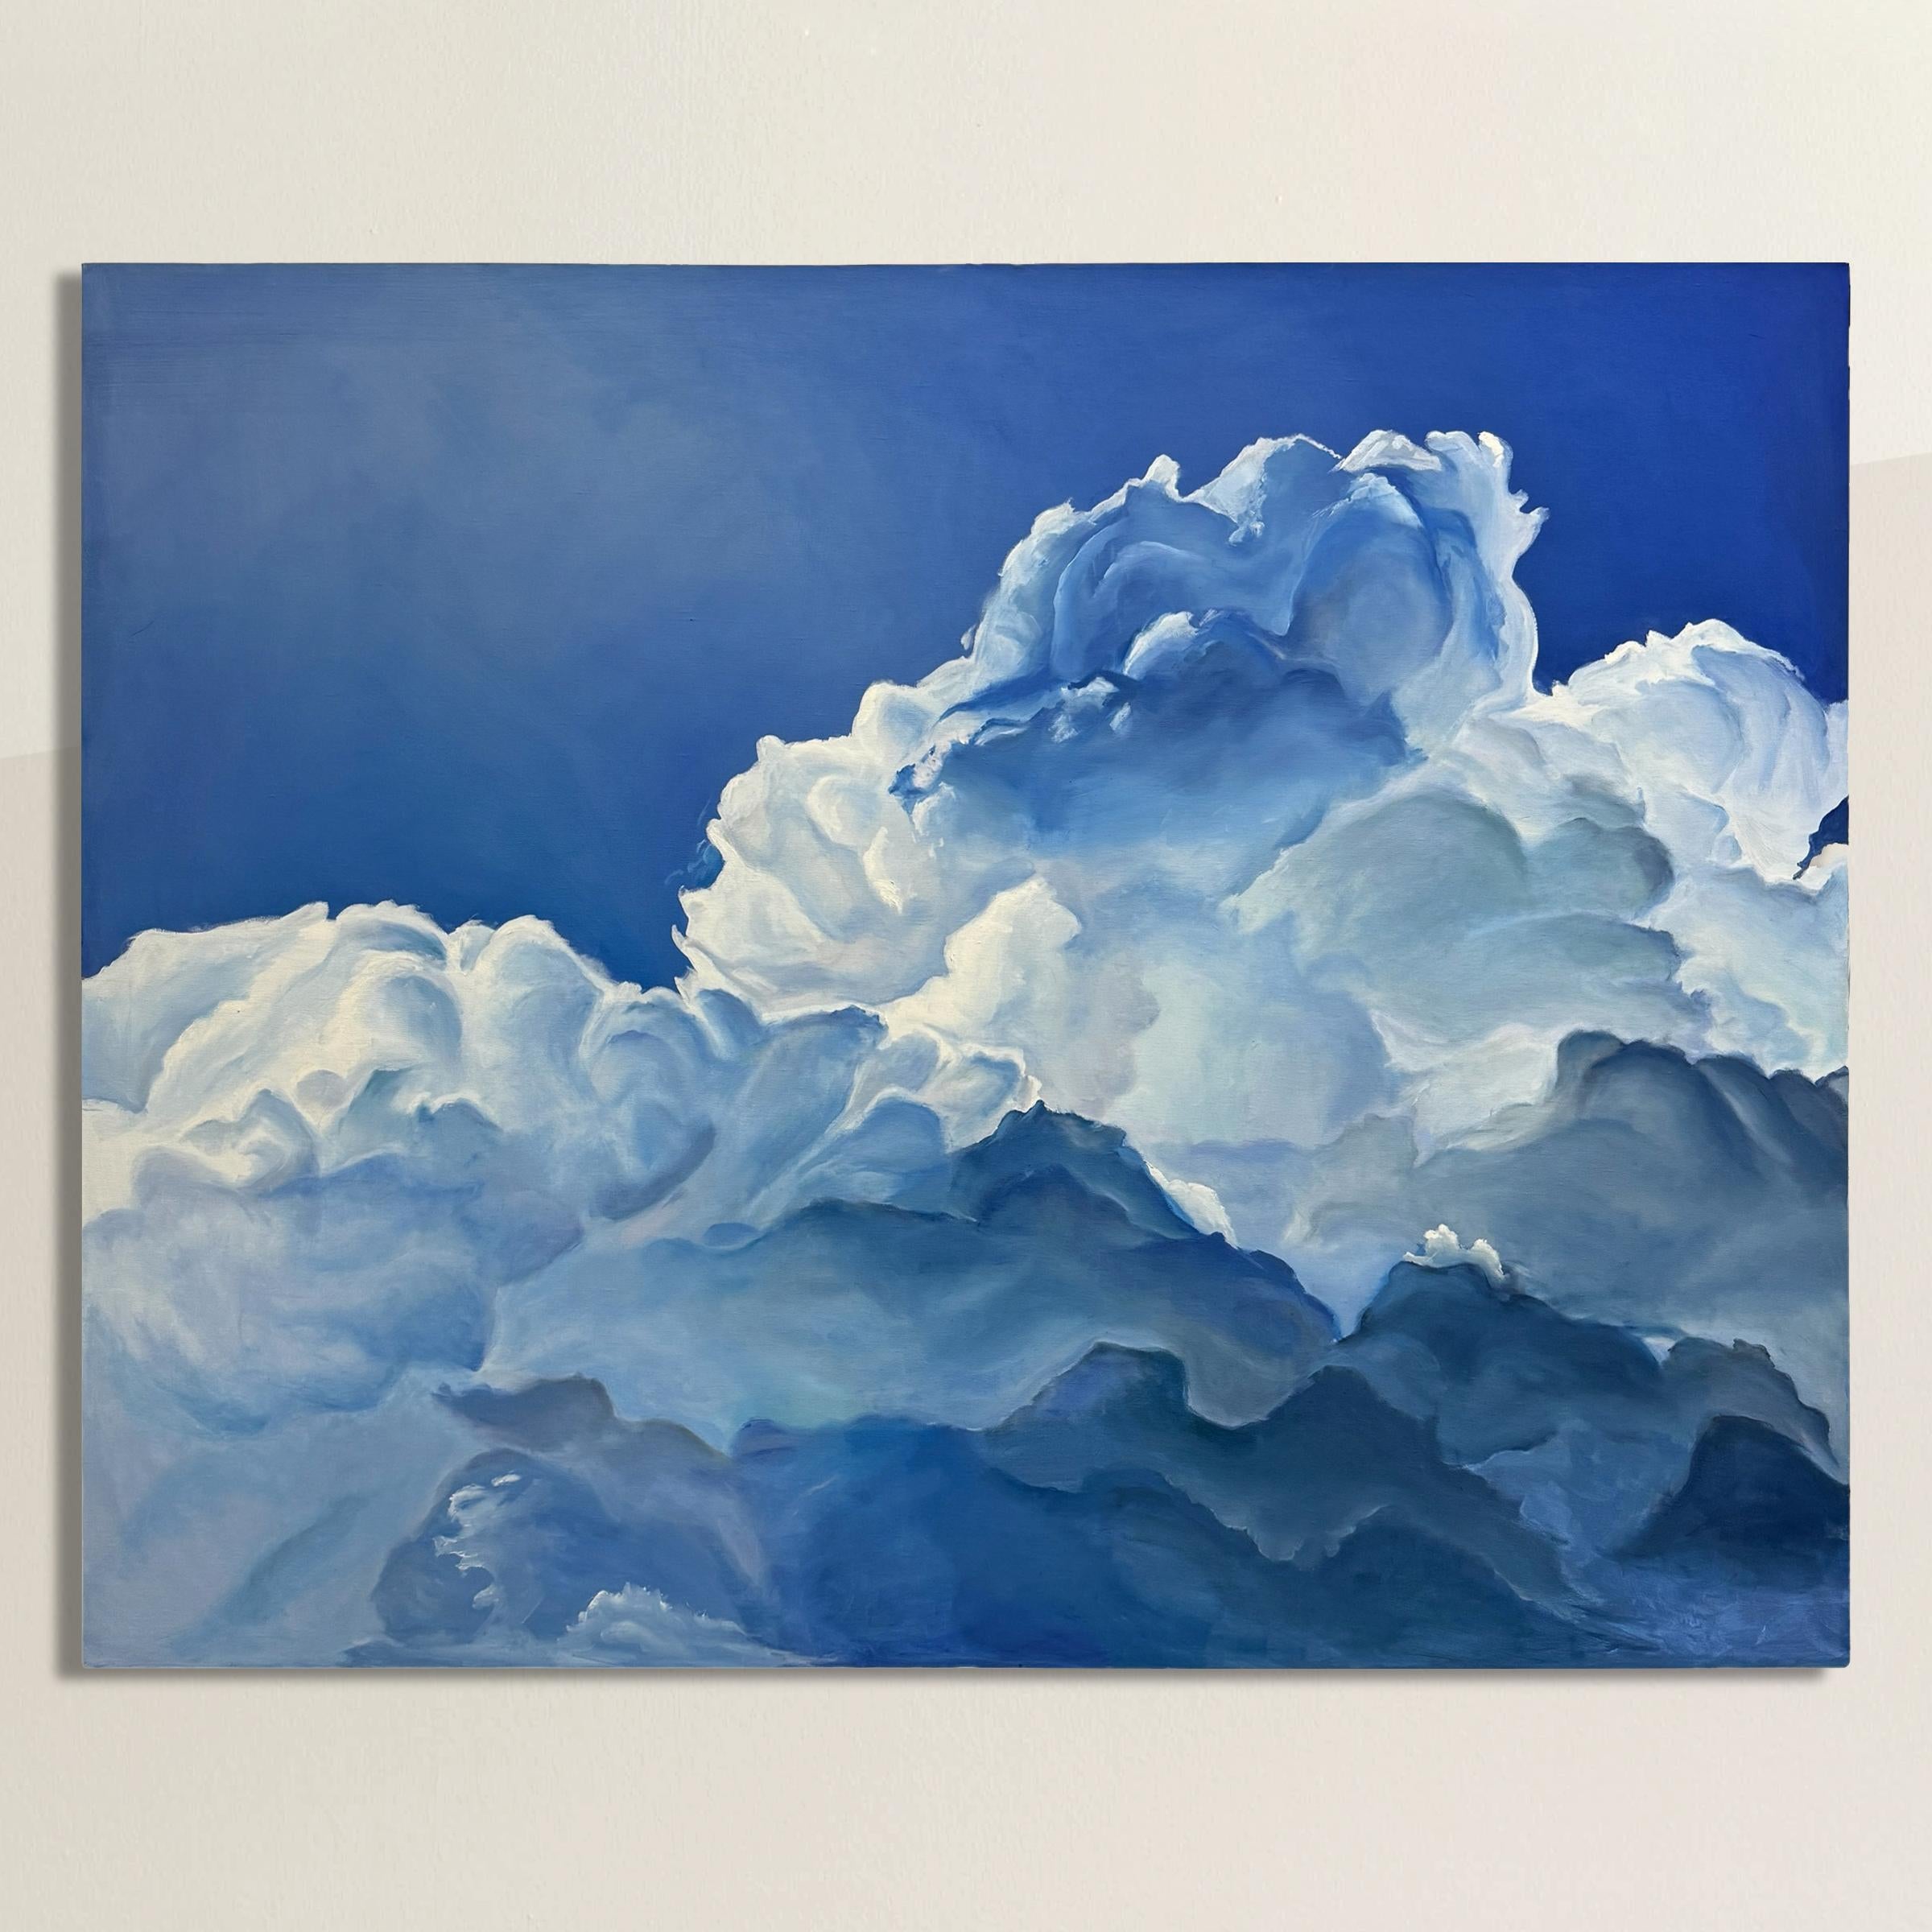 This captivating 4-foot by 5-foot oil on canvas painting is a contemporary American masterpiece that captures the raw, untamed beauty of wild billowing storm clouds set against a royal blue sky, reminiscent of a cool, crisp fall day. Its dramatic